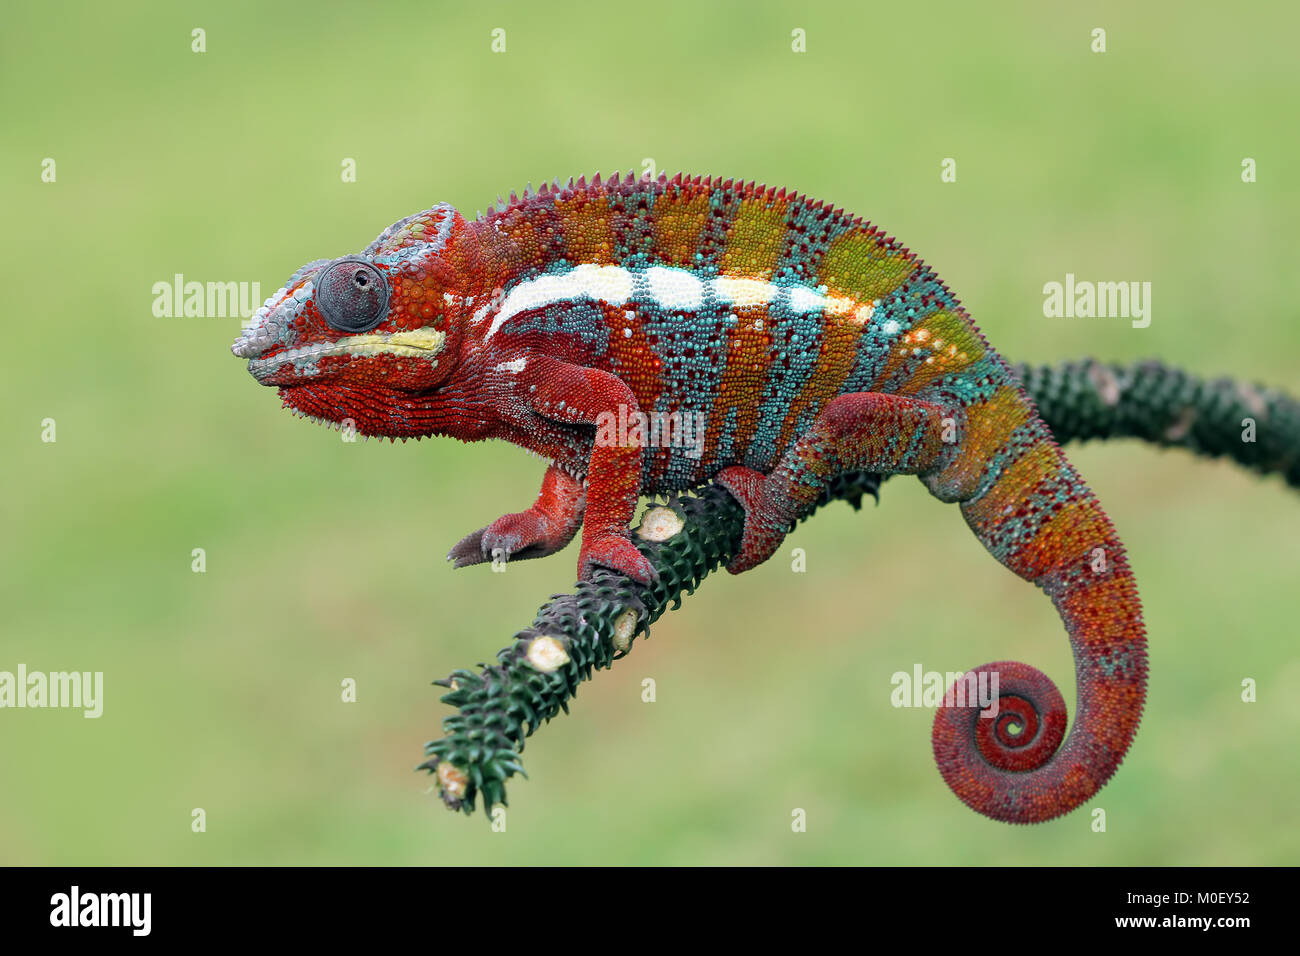 Panther Chameleon on branch Stock Photo